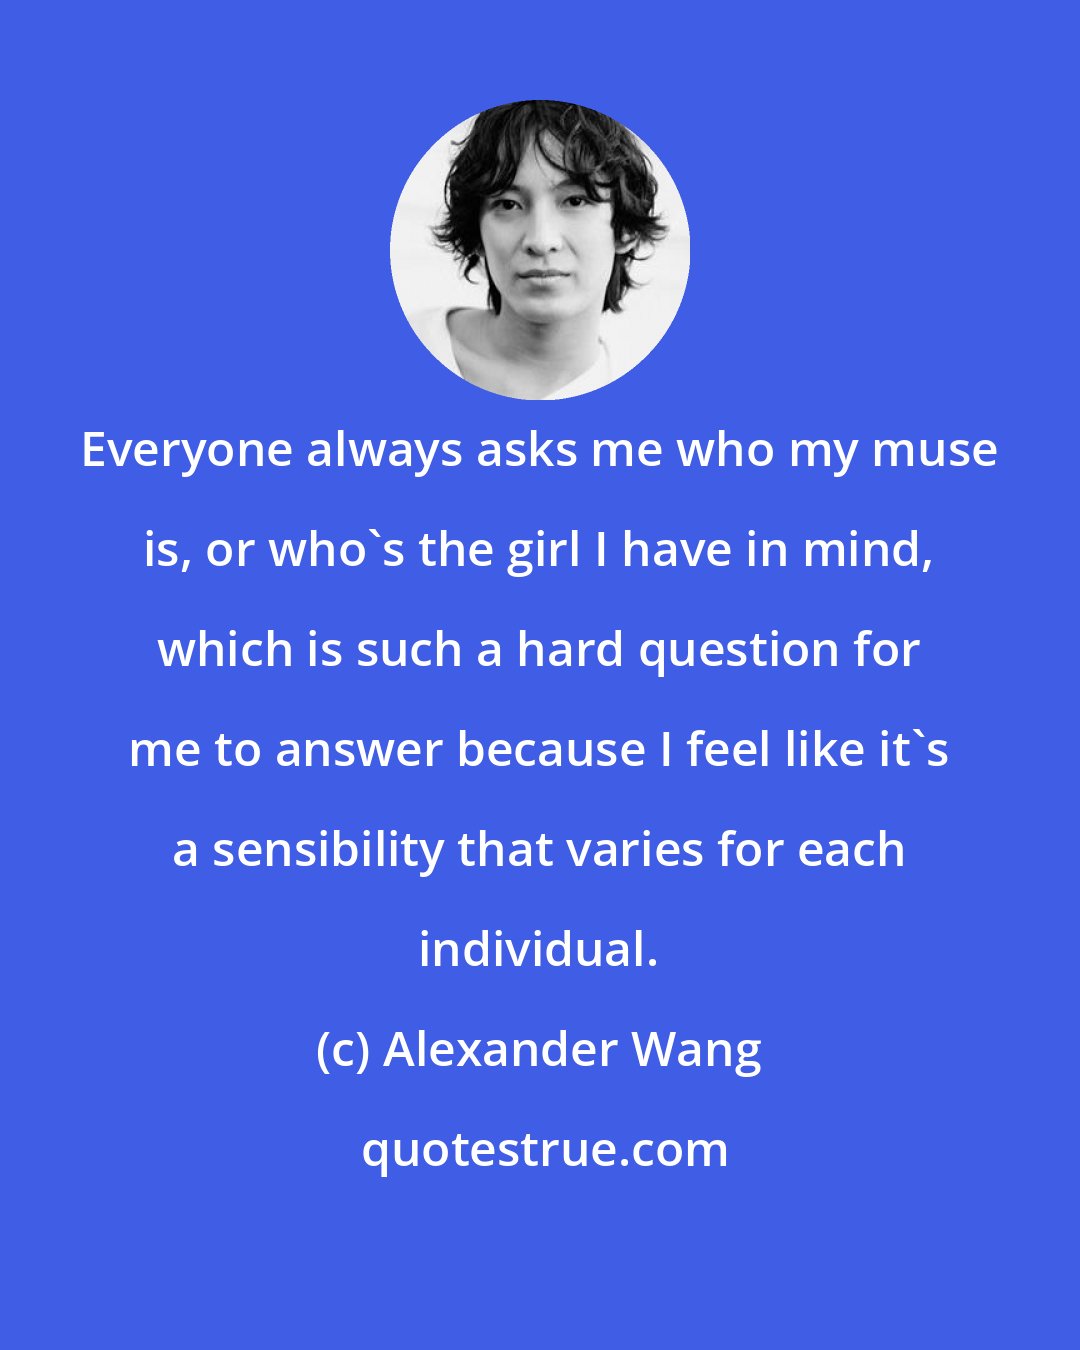 Alexander Wang: Everyone always asks me who my muse is, or who's the girl I have in mind, which is such a hard question for me to answer because I feel like it's a sensibility that varies for each individual.